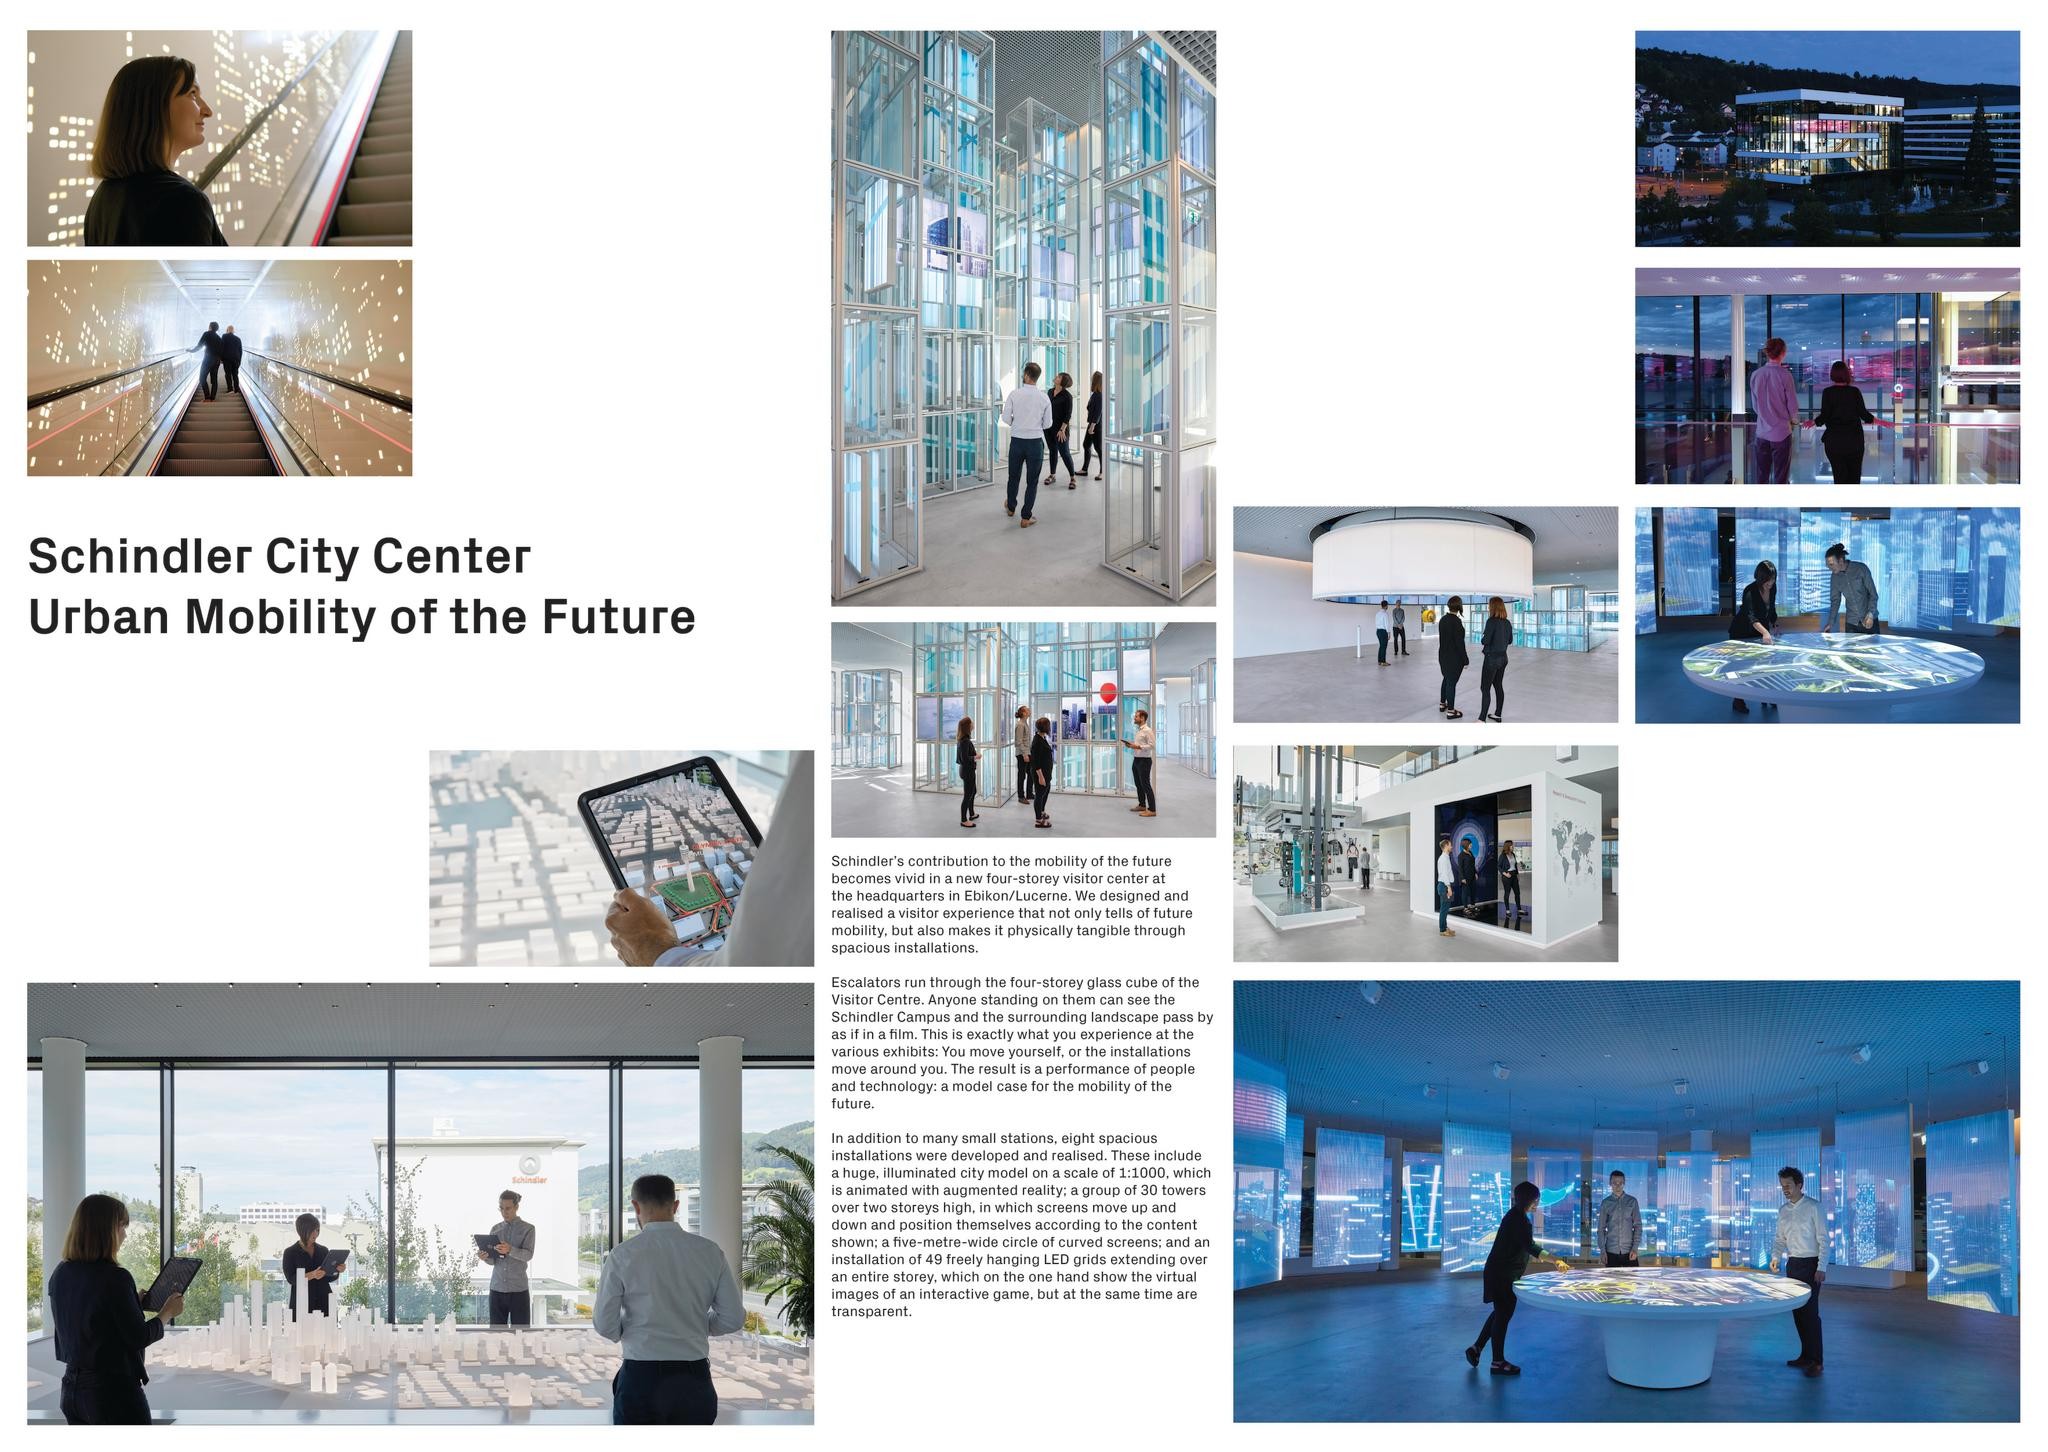 SCHINDLER CITY CENTER – URBAN MOBILITY OF THE FUTURE